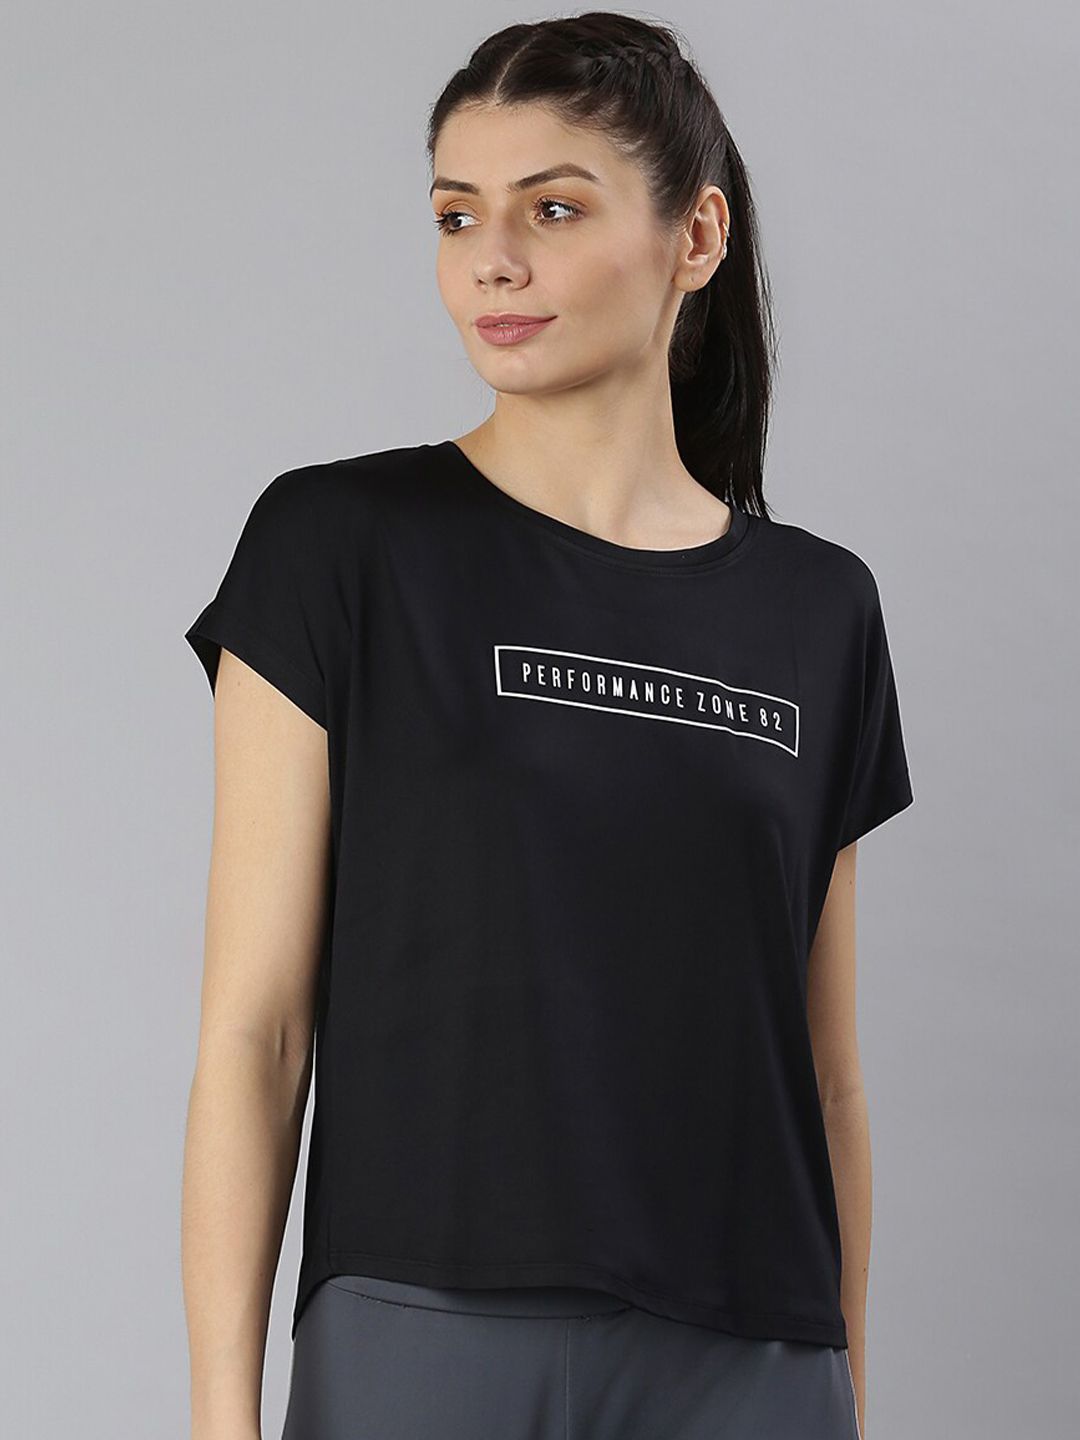 MKH Women Black Solid Dry-Fit T-shirt Price in India